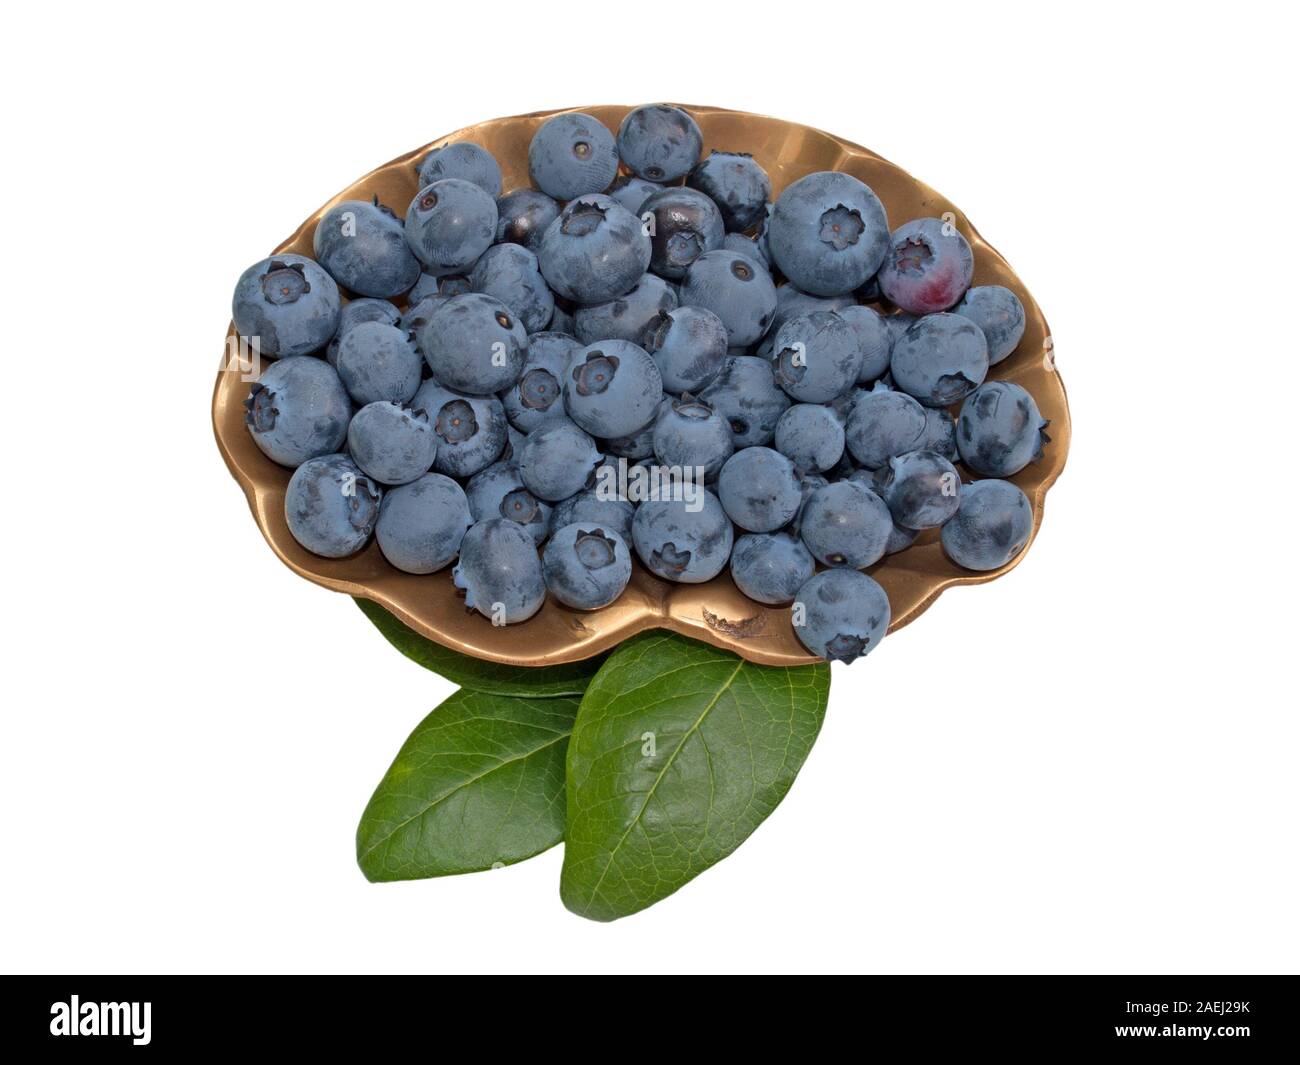 Blueberries on a bowl against white background Stock Photo